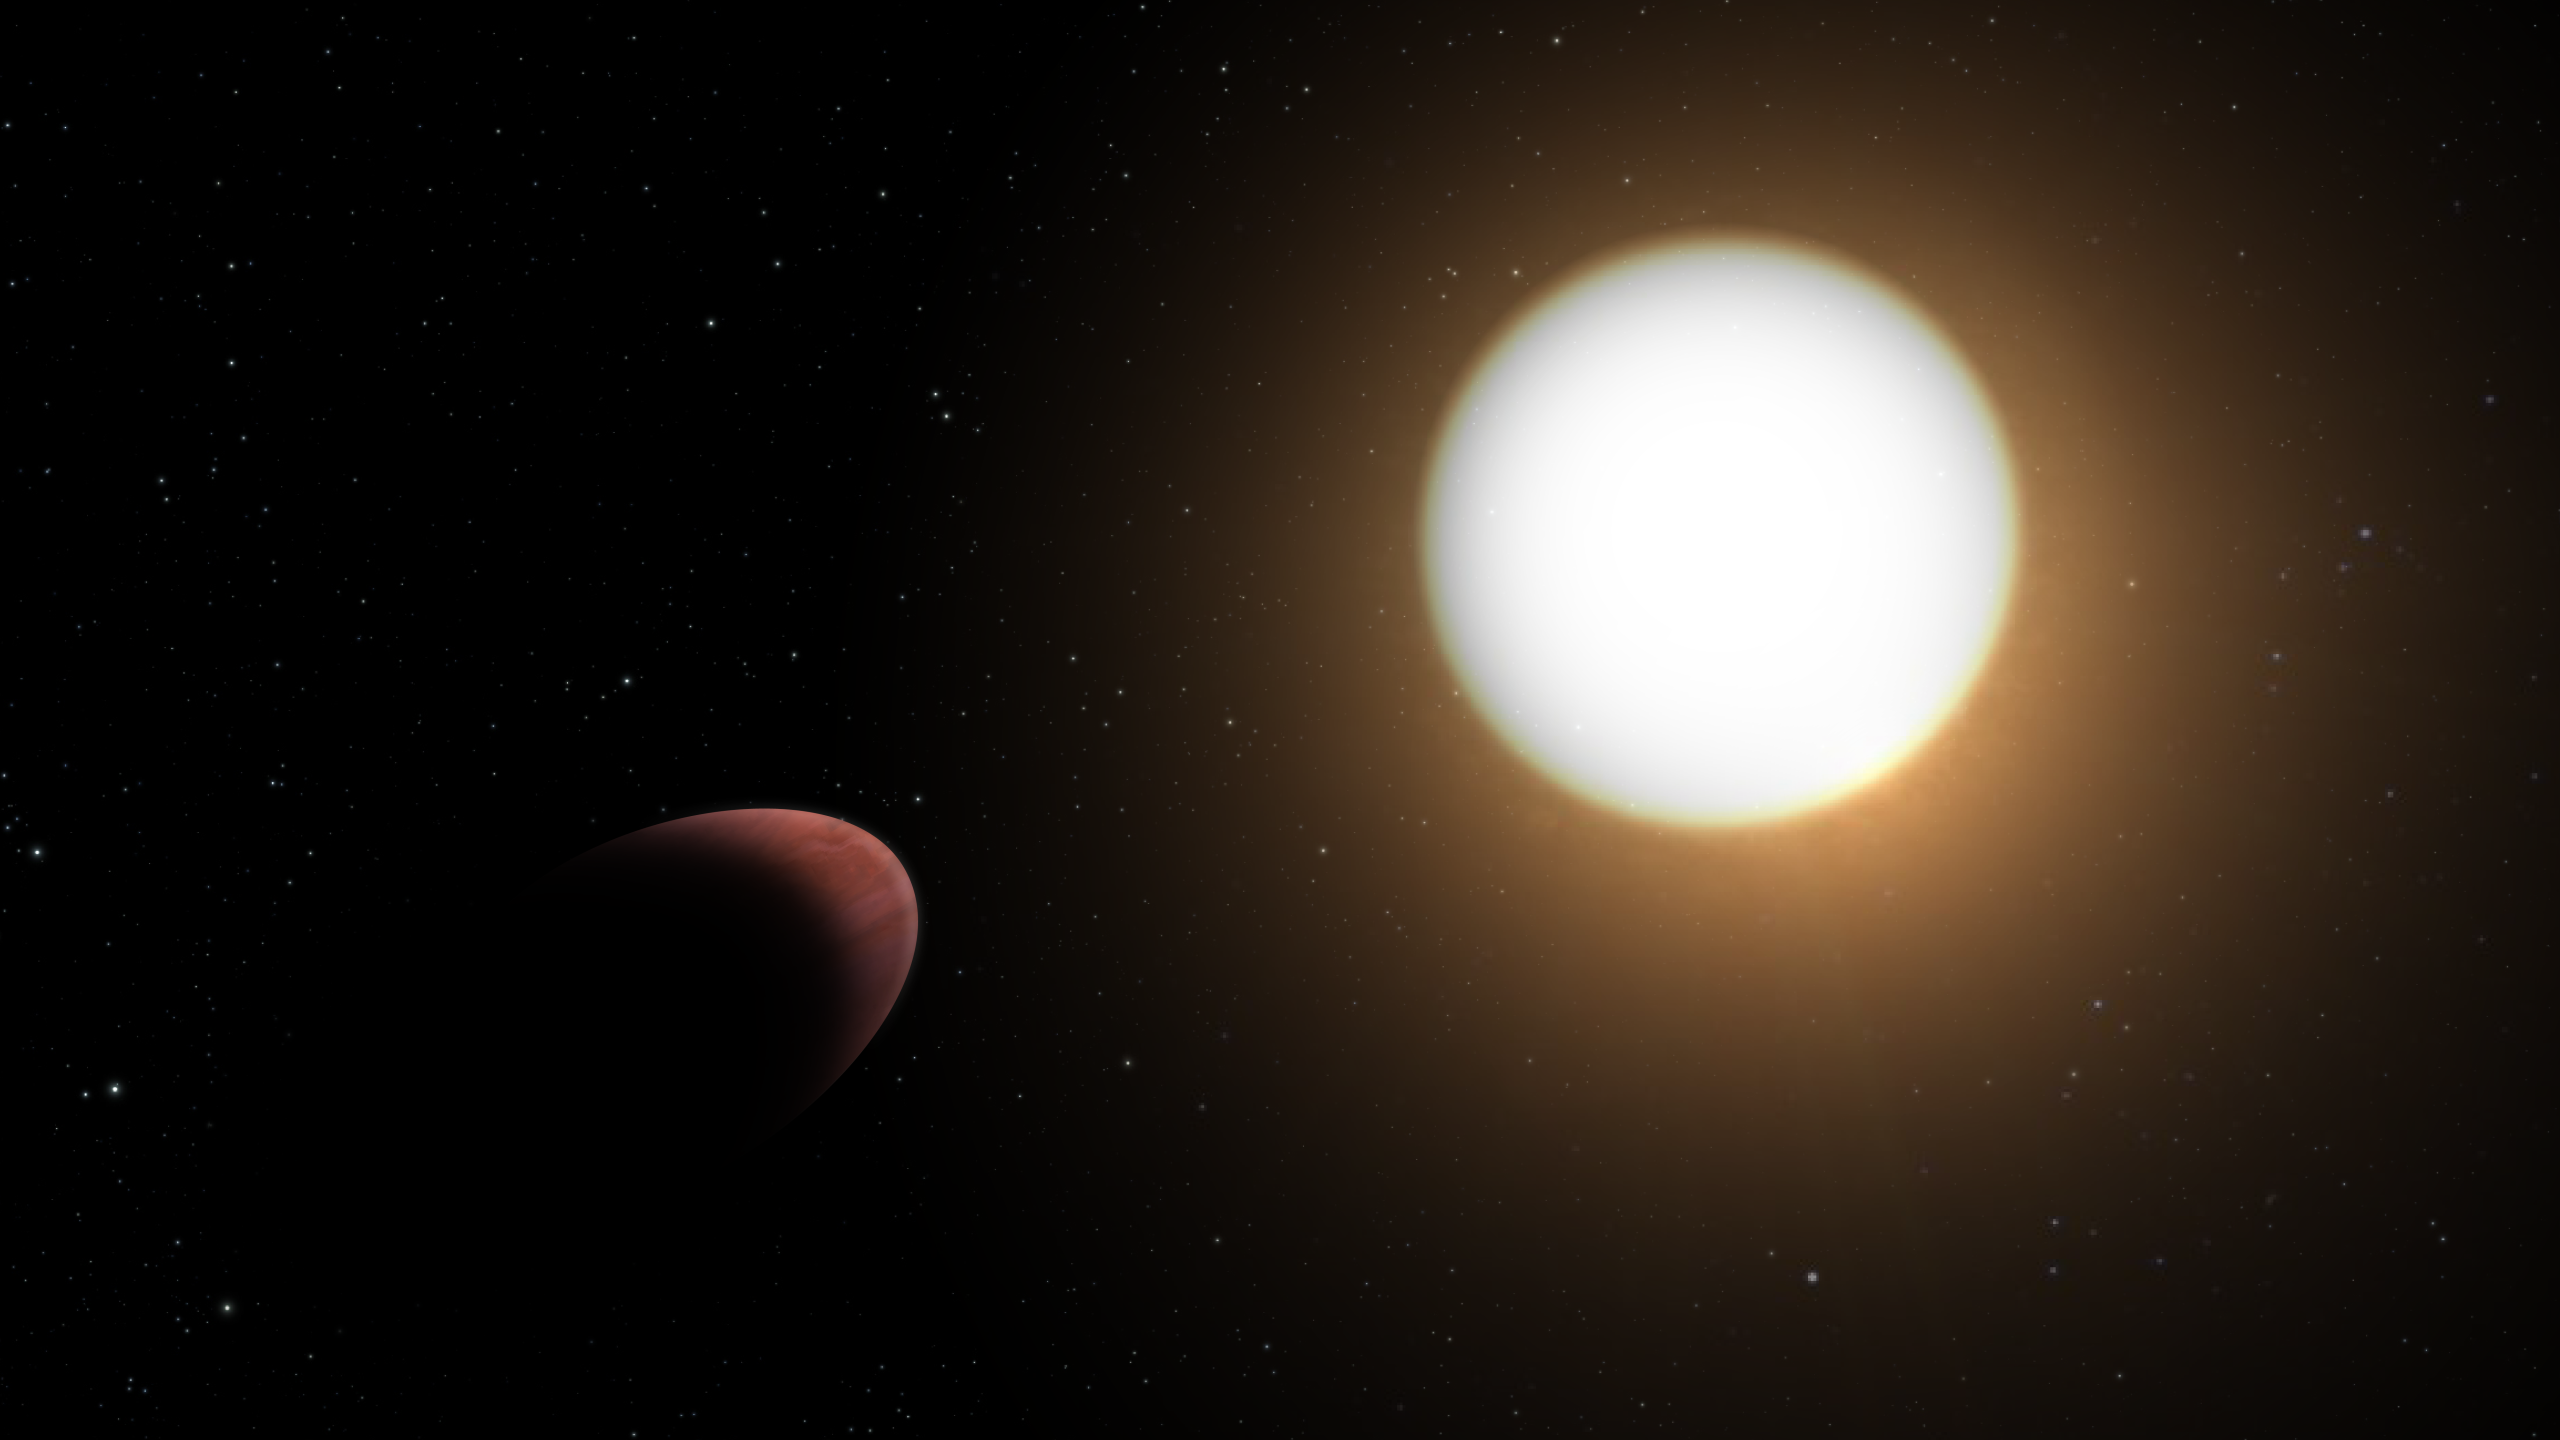 Exoplanet WASP-103b is not a sphere. Credit: ESA